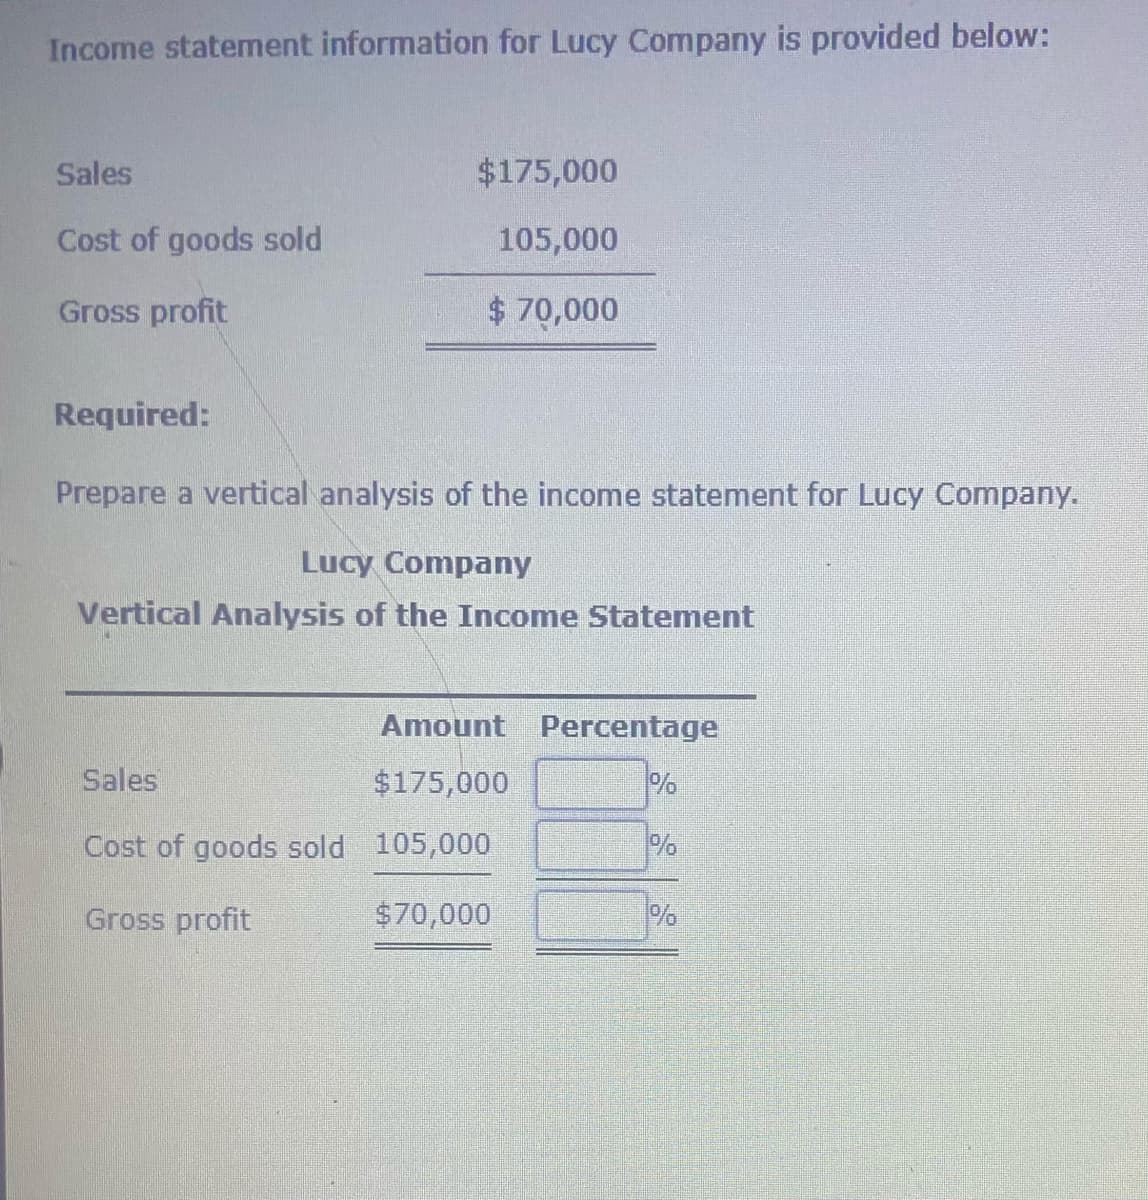 Income statement information for Lucy Company is provided below:
Sales
$175,000
Cost of goods sold
105,000
Gross profit
$70,000
Required:
Prepare a vertical analysis of the income statement for Lucy Company.
Lucy Company
Vertical Analysis of the Income Statement
Amount Percentage
Sales
$175,000
%
Cost of goods sold 105,000
Gross profit
$70,000
%
